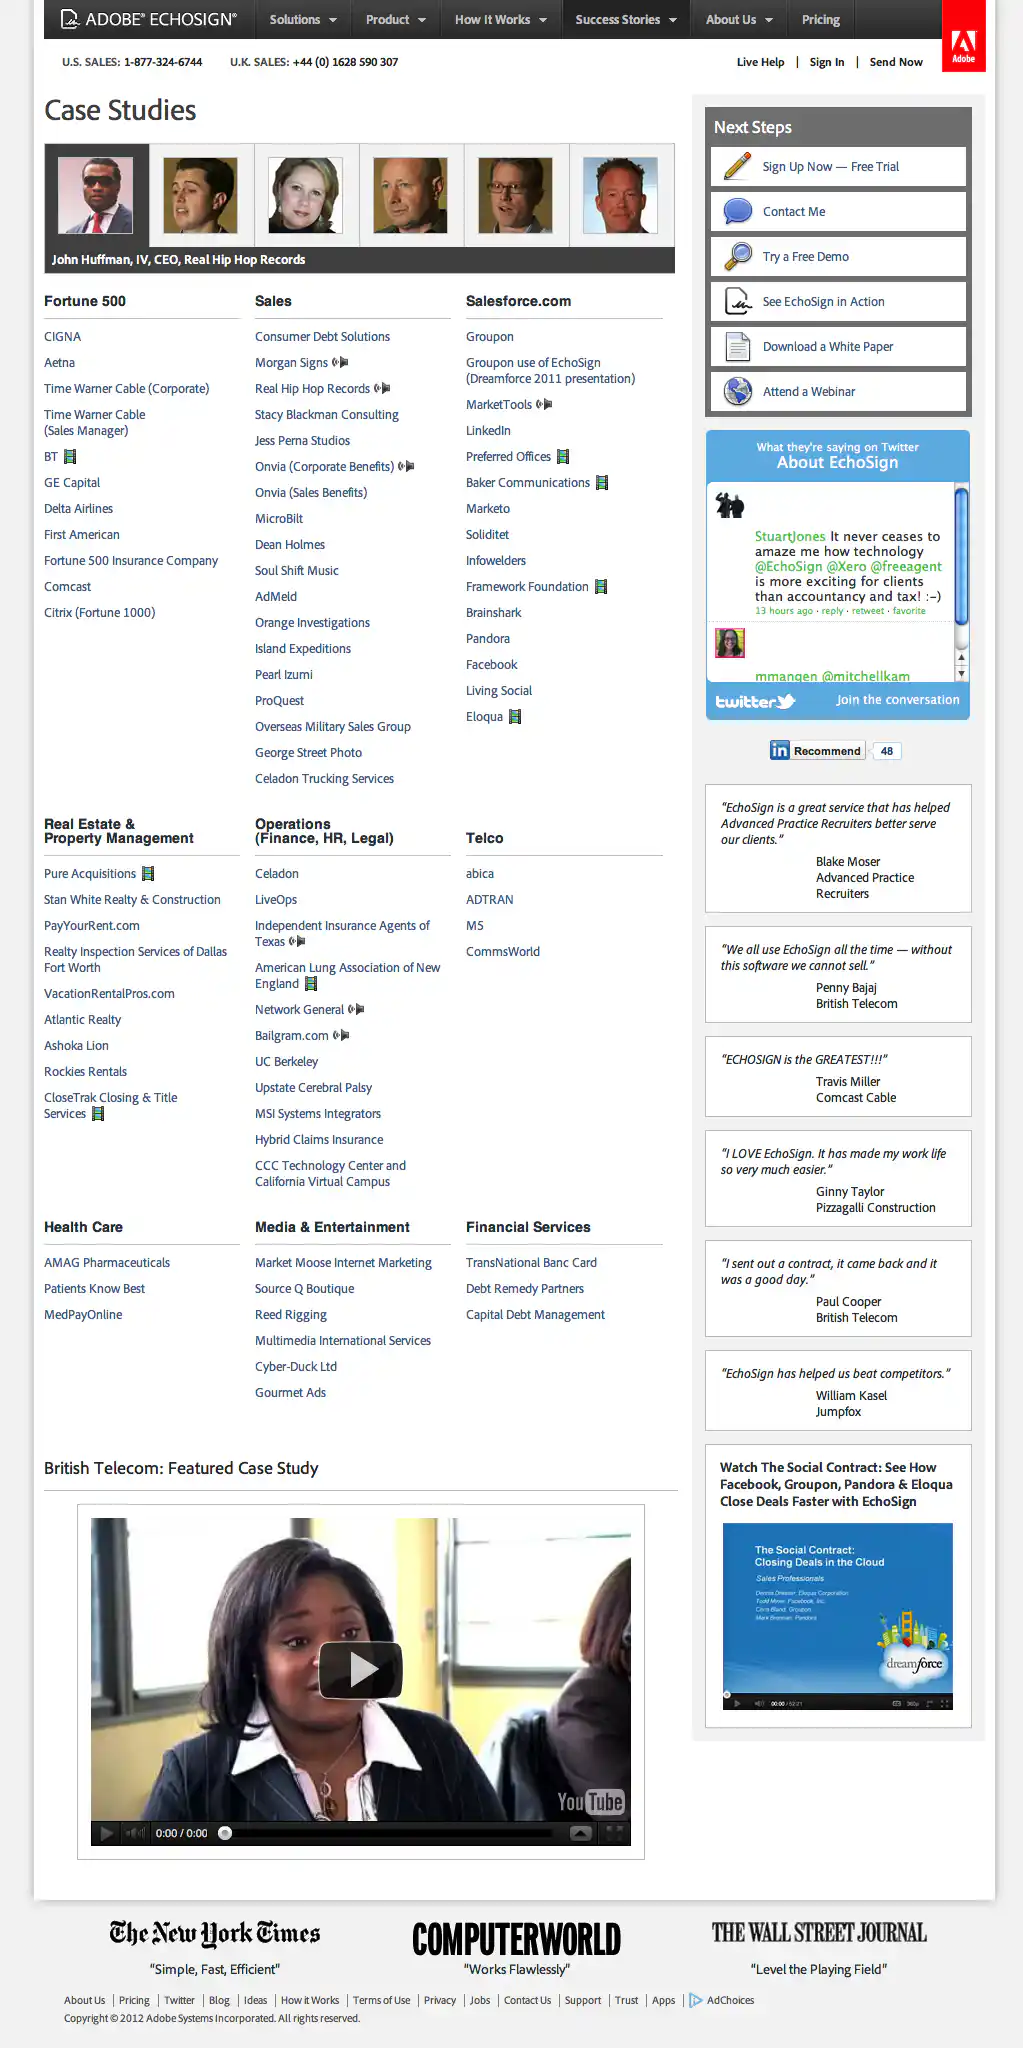 image showing page design after redesign